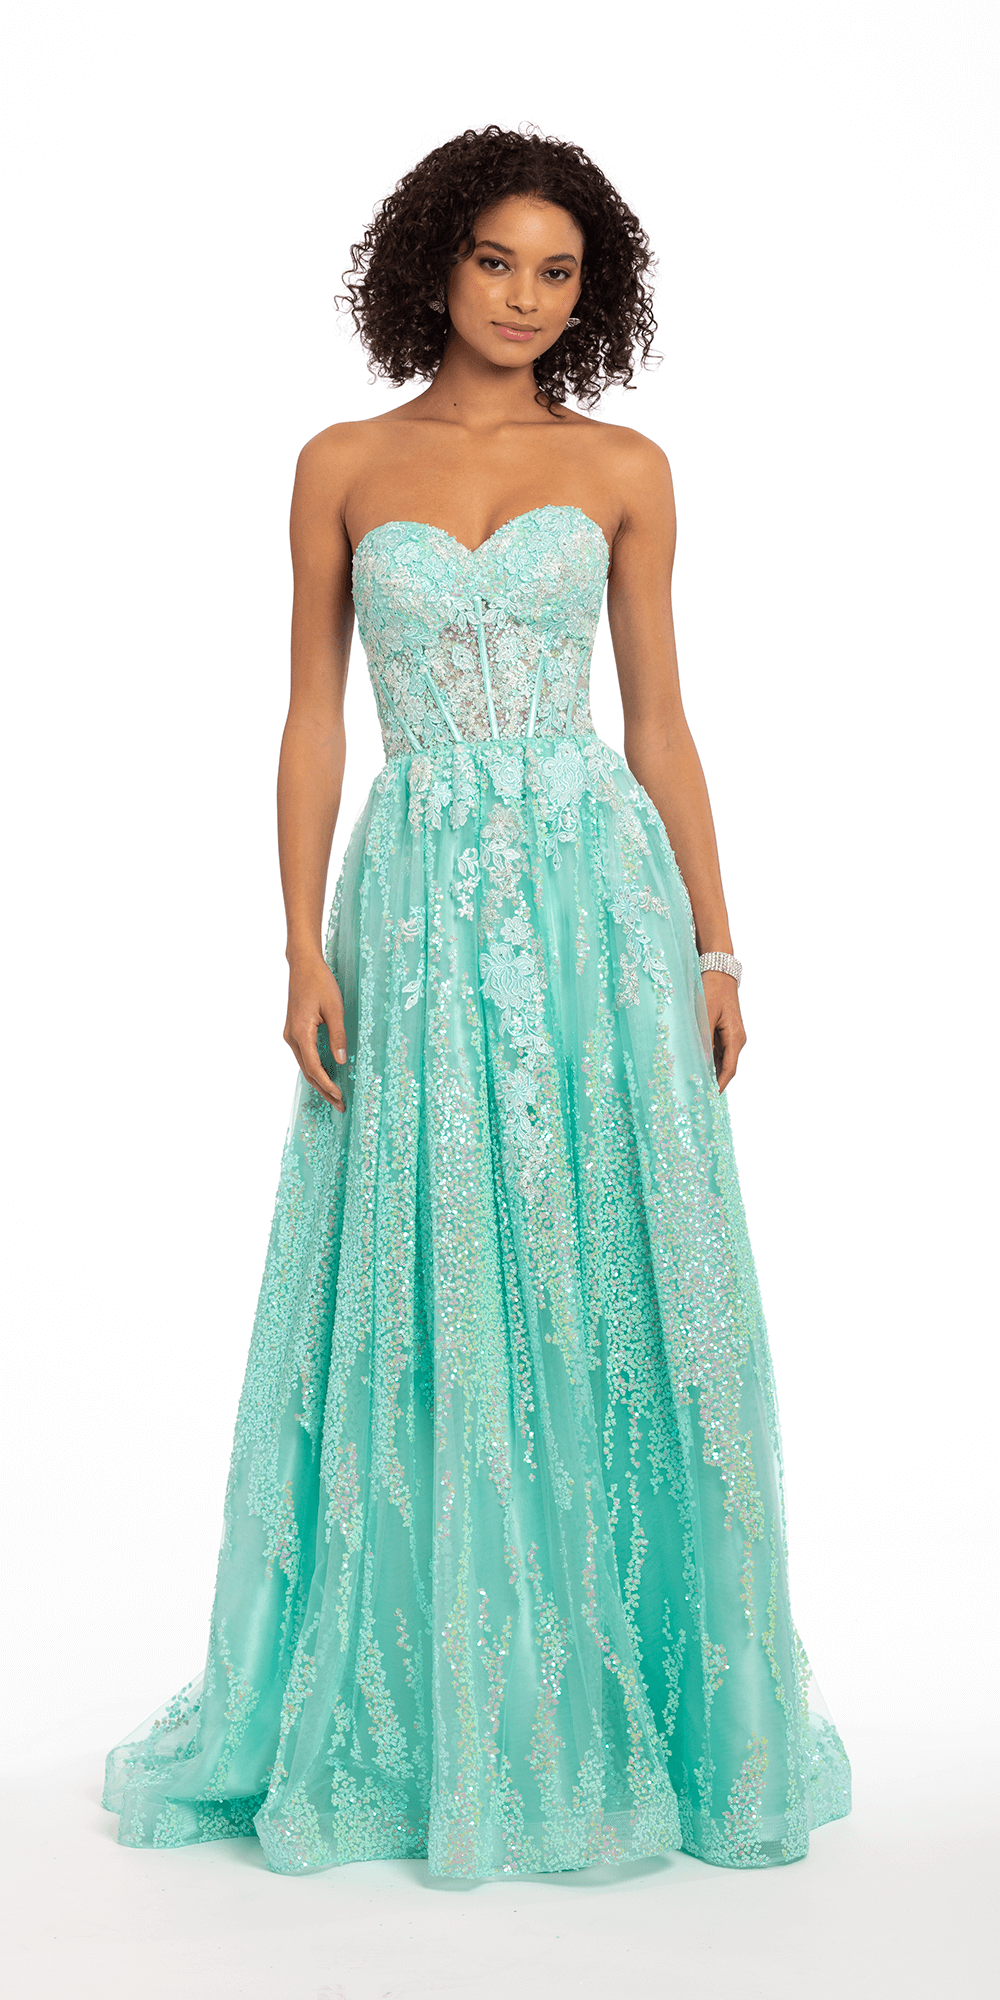 Sequin Halter Open Back Gown With Feathers in Seafoam Blue and Green